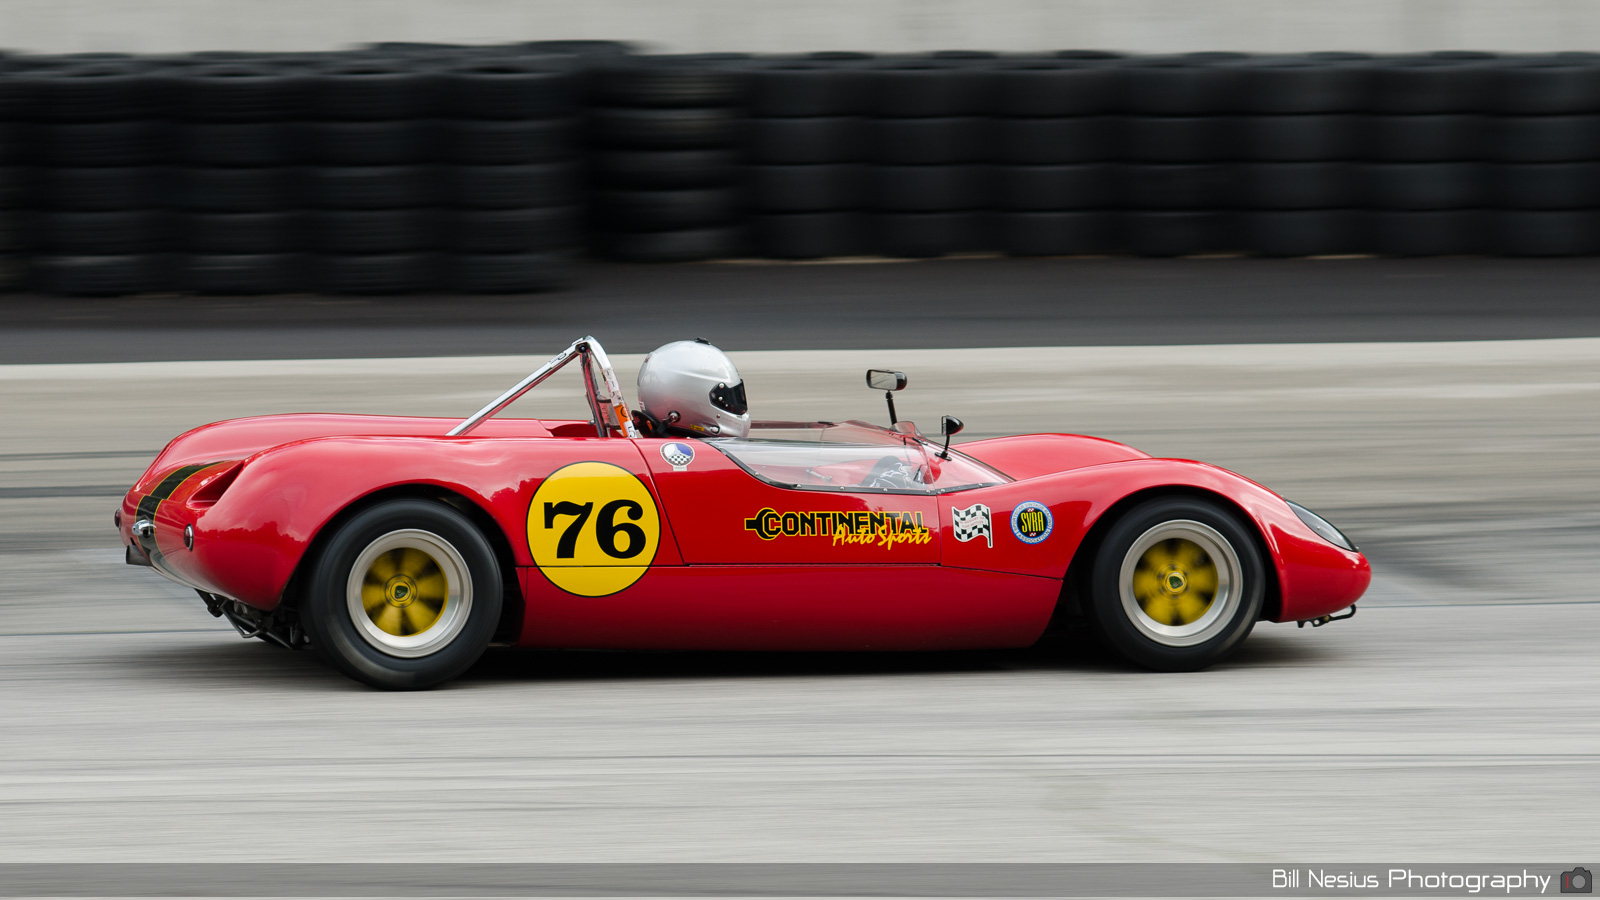 1965 Lotus 23 No.76 drinen by Joel Weinberger  at Road America T12  / DSC_5700 / 4